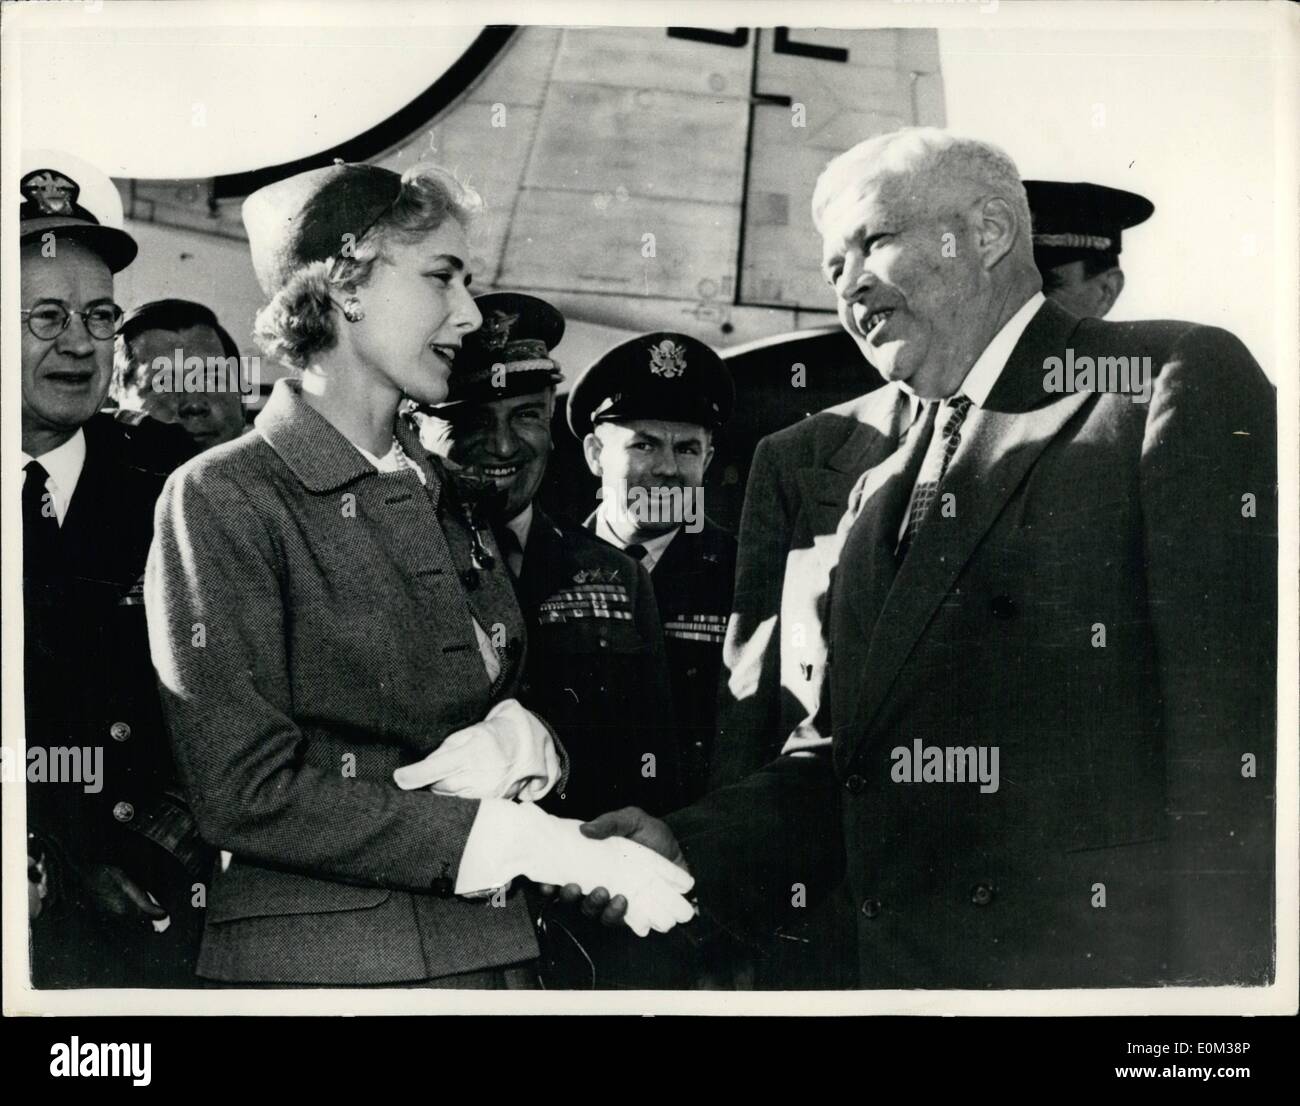 May 02, 1953 - 2-5-53 New United States Ambassador to Italy greets American Defence Minister in Rome. Keystone Photo Shows: Mrs. Clare Boothe Luce, newly appointed American Ambassador to Italy, greets Mr. Wilson, the American Minister of Defence when he arrived in Rome recently. Stock Photo